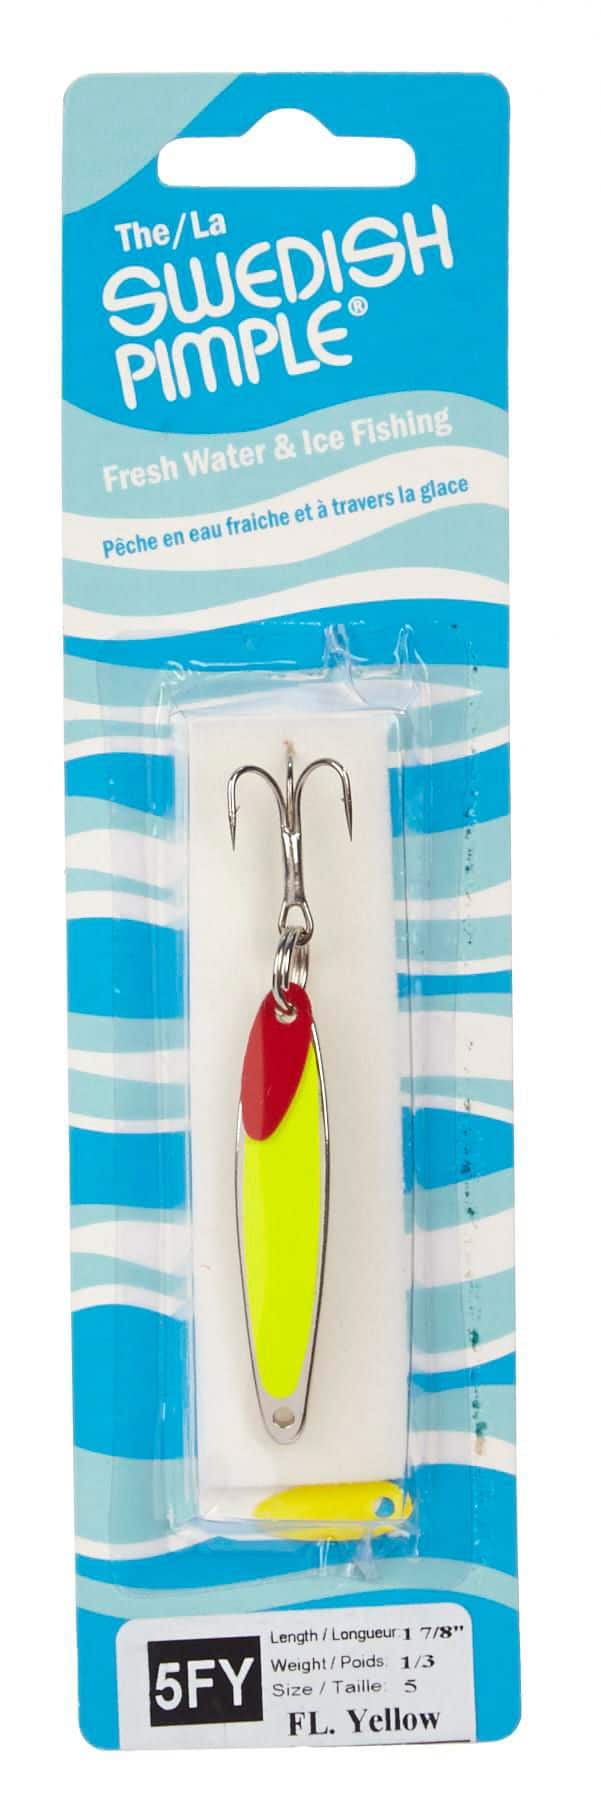 https://media-www.canadiantire.ca/product/playing/fishing/ice-fishing/0777140/swedish-pimple-lure-fluorescent-yellow-1-3oz-c2d28a3c-c41f-47b6-89cf-1e98d88fc205-jpgrendition.jpg